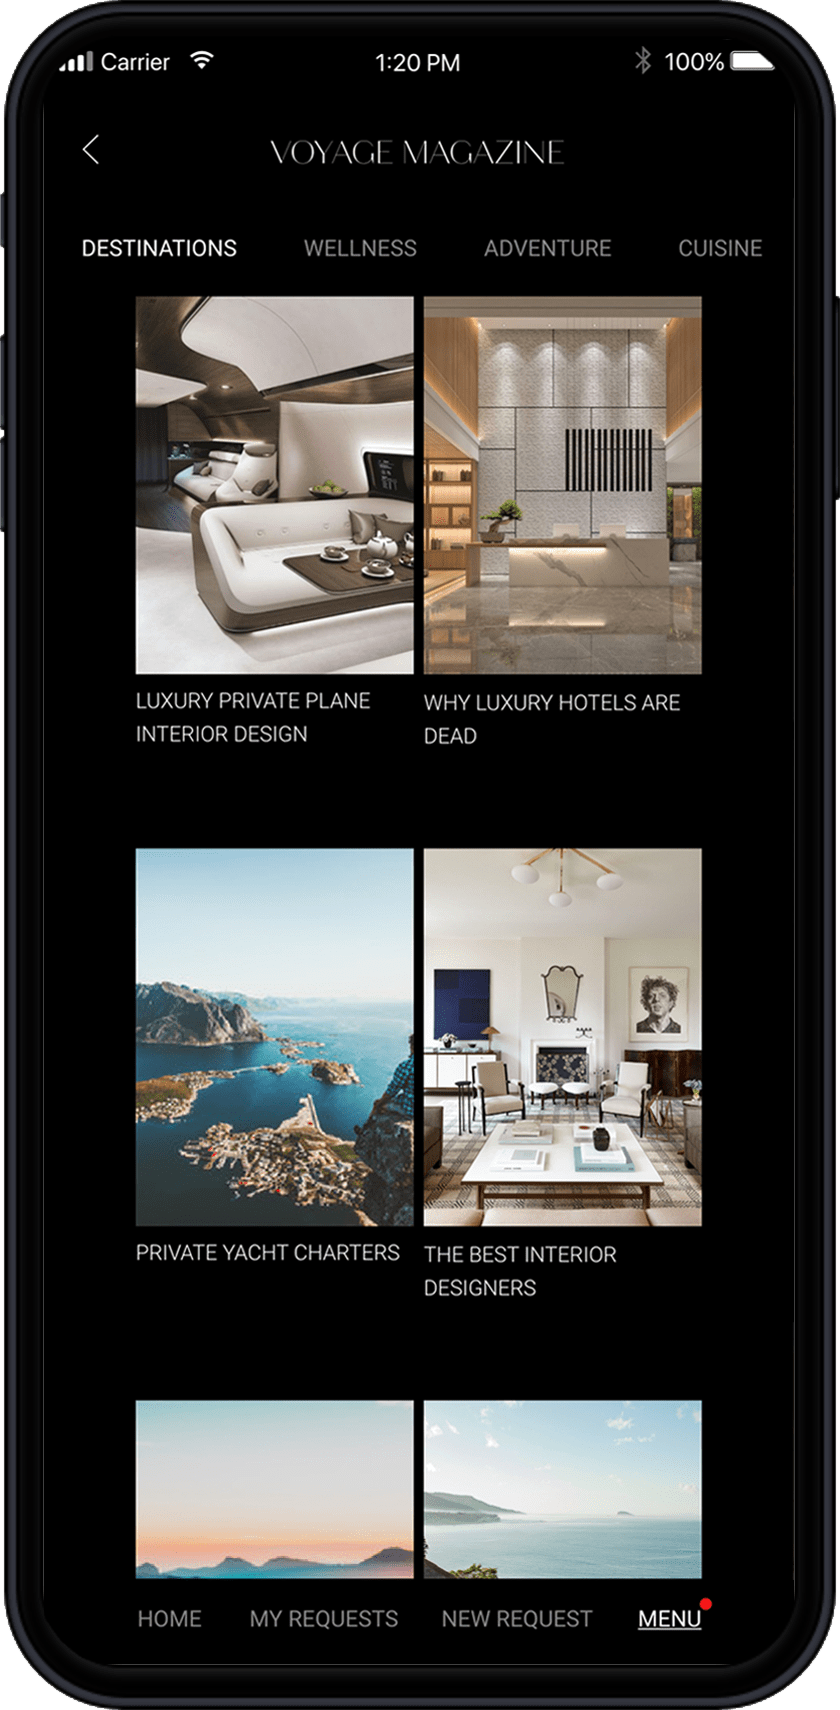 Explore luxury travel and luxury lifestyle content through the Sienna Charles app